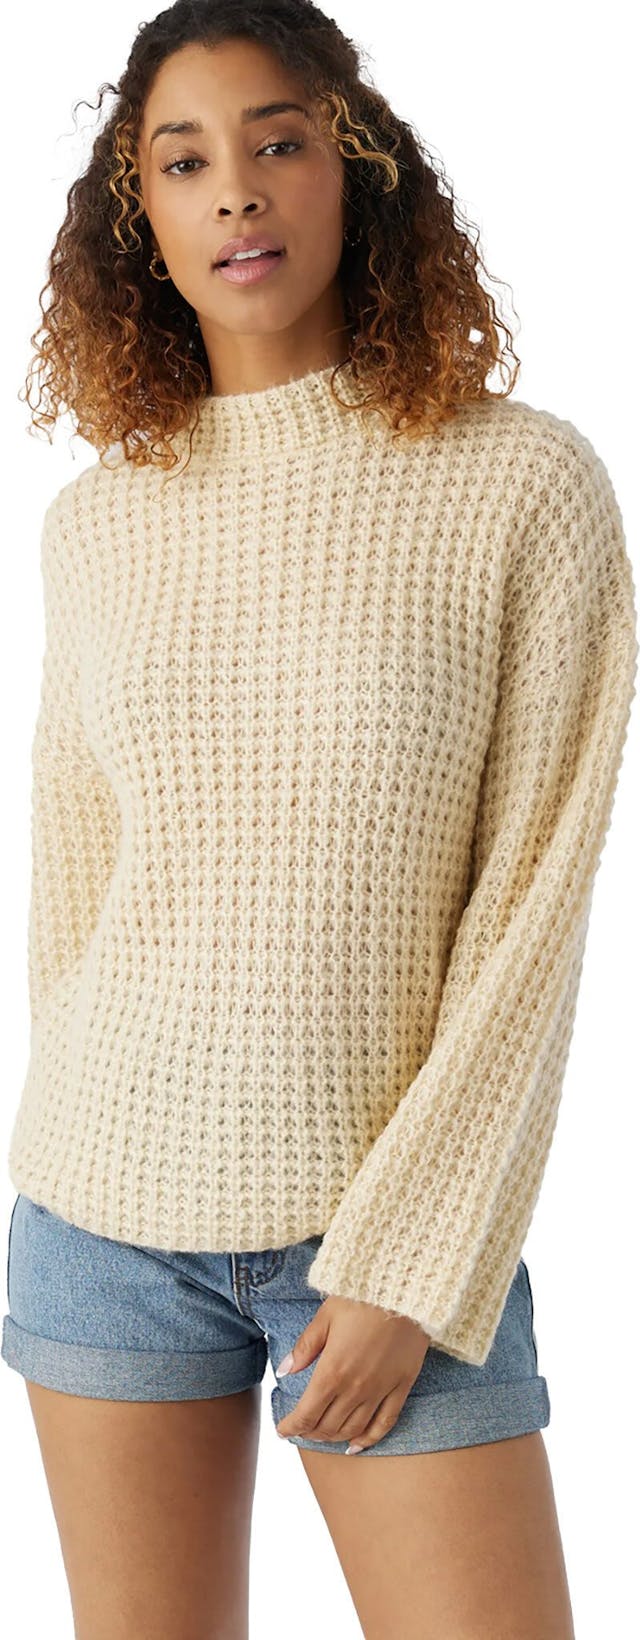 Product image for Fawn Long Sleeve Mock Neck Sweater - Women's